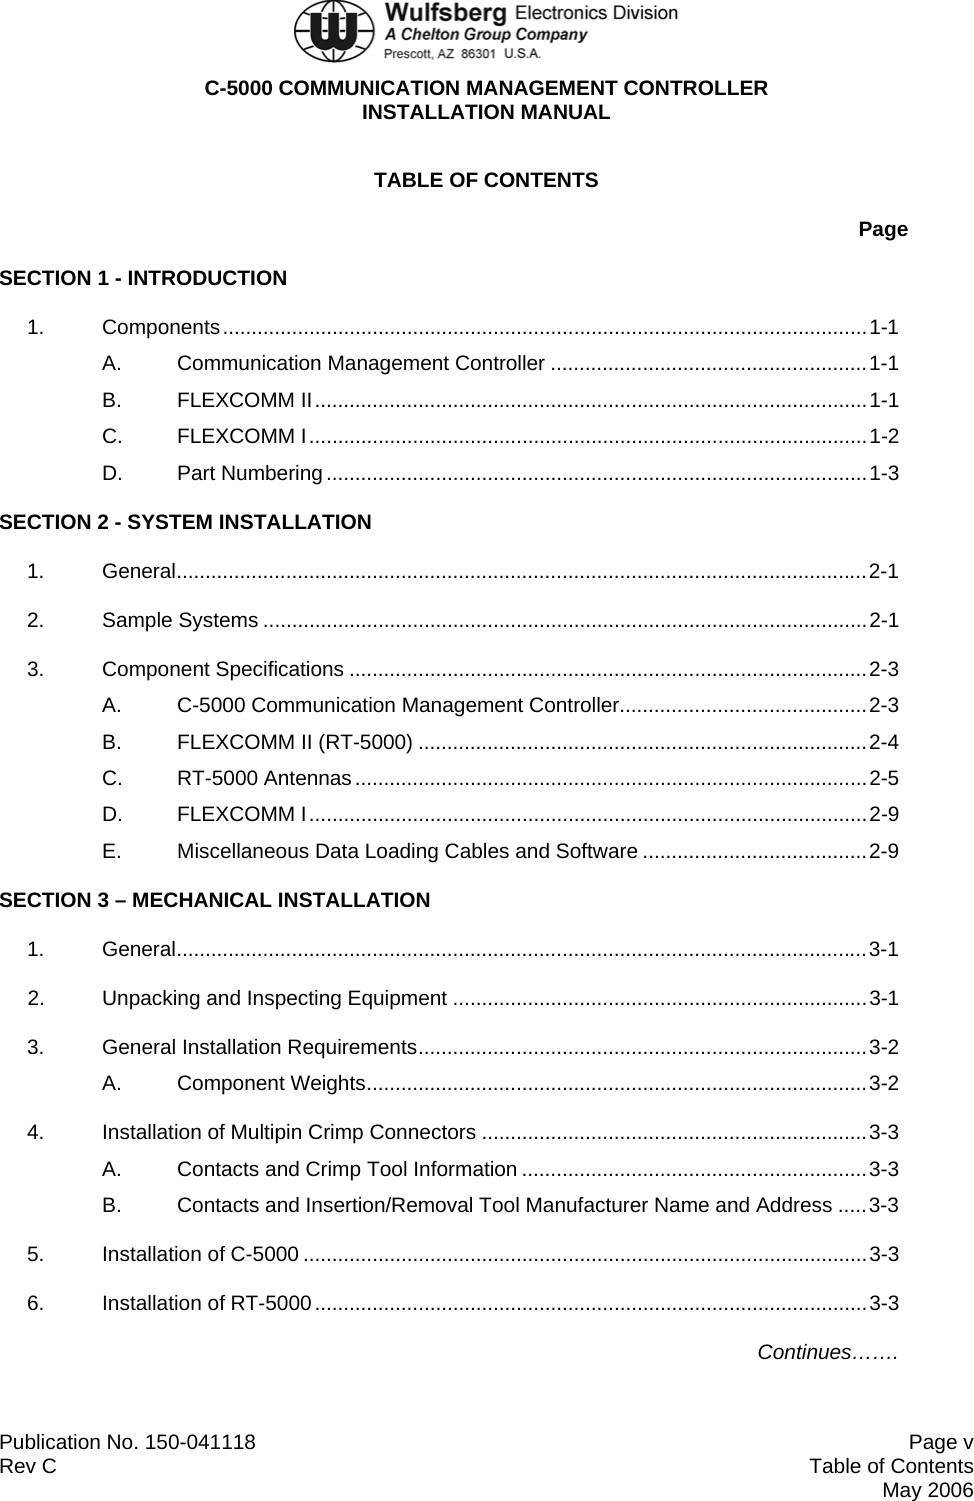  C-5000 COMMUNICATION MANAGEMENT CONTROLLER INSTALLATION MANUAL  Publication No. 150-041118  Page v Rev C  Table of Contents  May 2006 TABLE OF CONTENTS Page SECTION 1 - INTRODUCTION 1. Components................................................................................................................1-1 A. Communication Management Controller .......................................................1-1 B. FLEXCOMM II................................................................................................1-1 C. FLEXCOMM I.................................................................................................1-2 D. Part Numbering..............................................................................................1-3 SECTION 2 - SYSTEM INSTALLATION 1. General........................................................................................................................2-1 2. Sample Systems .........................................................................................................2-1 3. Component Specifications ..........................................................................................2-3 A. C-5000 Communication Management Controller...........................................2-3 B.  FLEXCOMM II (RT-5000) ..............................................................................2-4 C. RT-5000 Antennas.........................................................................................2-5 D. FLEXCOMM I.................................................................................................2-9 E.  Miscellaneous Data Loading Cables and Software .......................................2-9 SECTION 3 – MECHANICAL INSTALLATION 1. General........................................................................................................................3-1 2.  Unpacking and Inspecting Equipment ........................................................................3-1 3. General Installation Requirements..............................................................................3-2 A. Component Weights.......................................................................................3-2 4.  Installation of Multipin Crimp Connectors ...................................................................3-3 A.  Contacts and Crimp Tool Information ............................................................3-3 B.  Contacts and Insertion/Removal Tool Manufacturer Name and Address .....3-3 5. Installation of C-5000 ..................................................................................................3-3 6. Installation of RT-5000................................................................................................3-3 Continues……. 